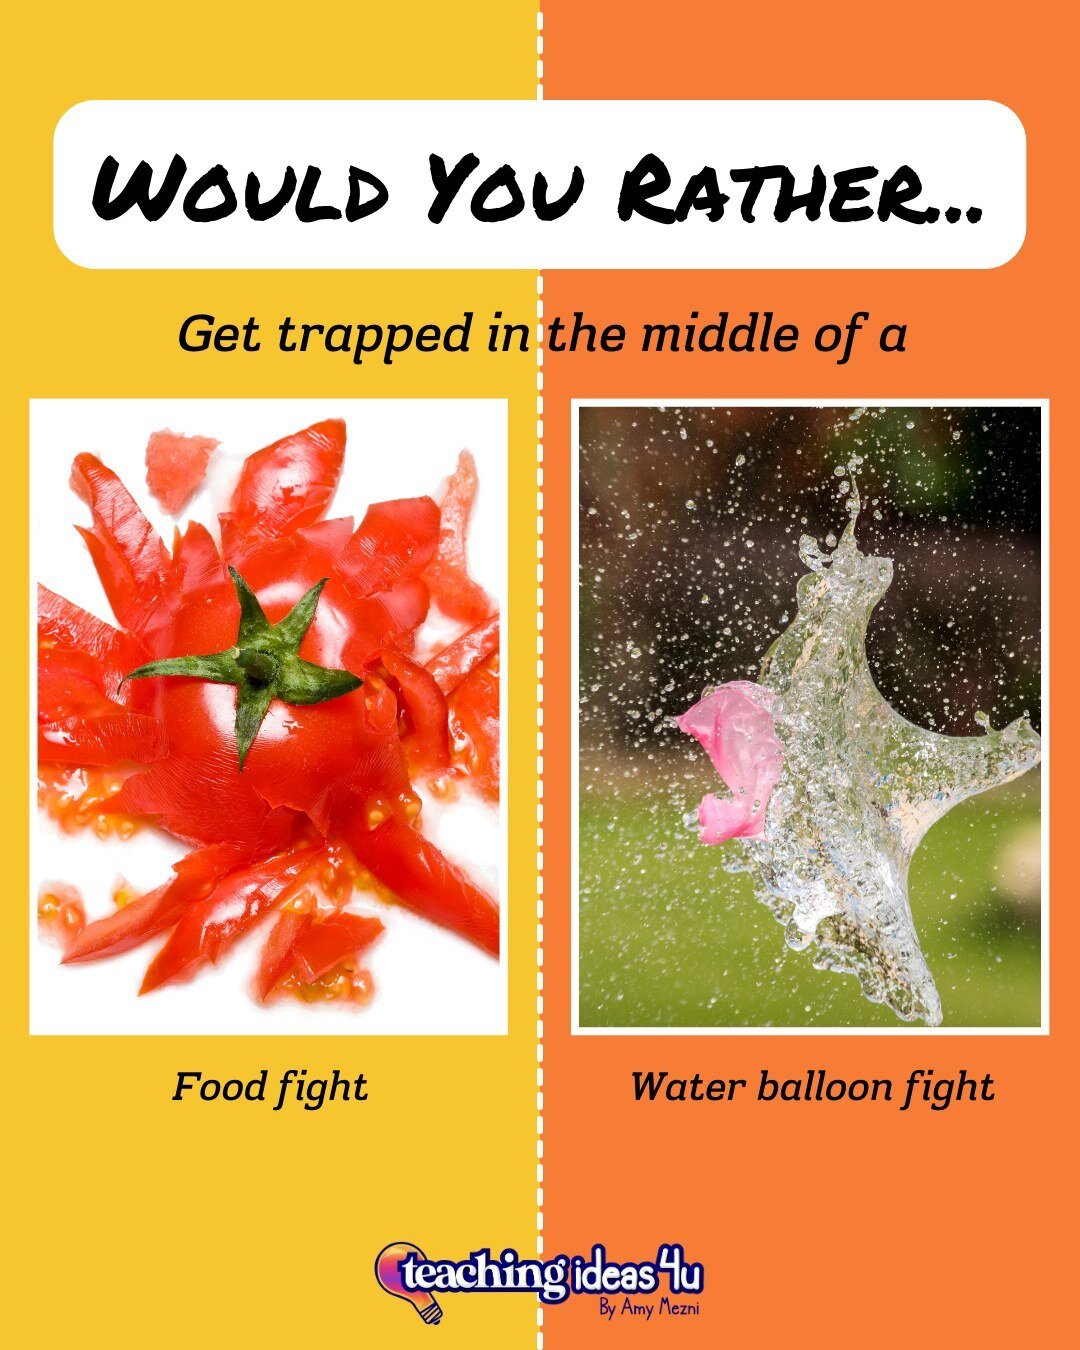 Assuming that it was all in good fun, would you rather get trapped in the middle of a food fight or water balloon fight?

[Image description: The rectangular image is divided in half vertically: the left half has a yellow background and the right hal